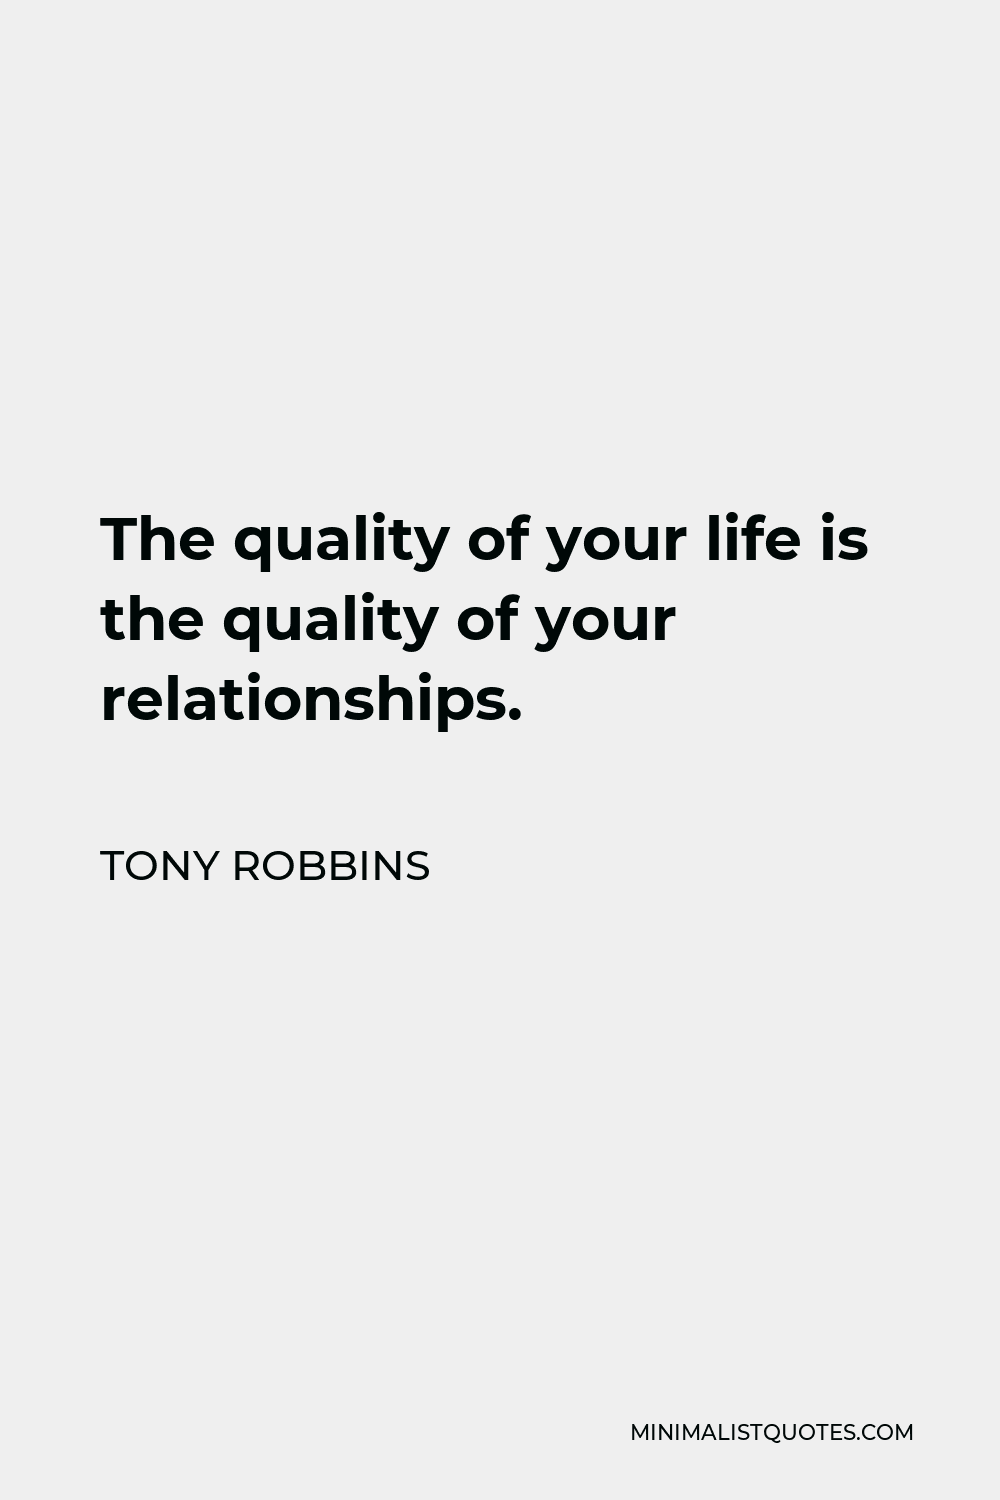 Tony Robbins Quote - The quality of your life is the quality of where you live emotionally.